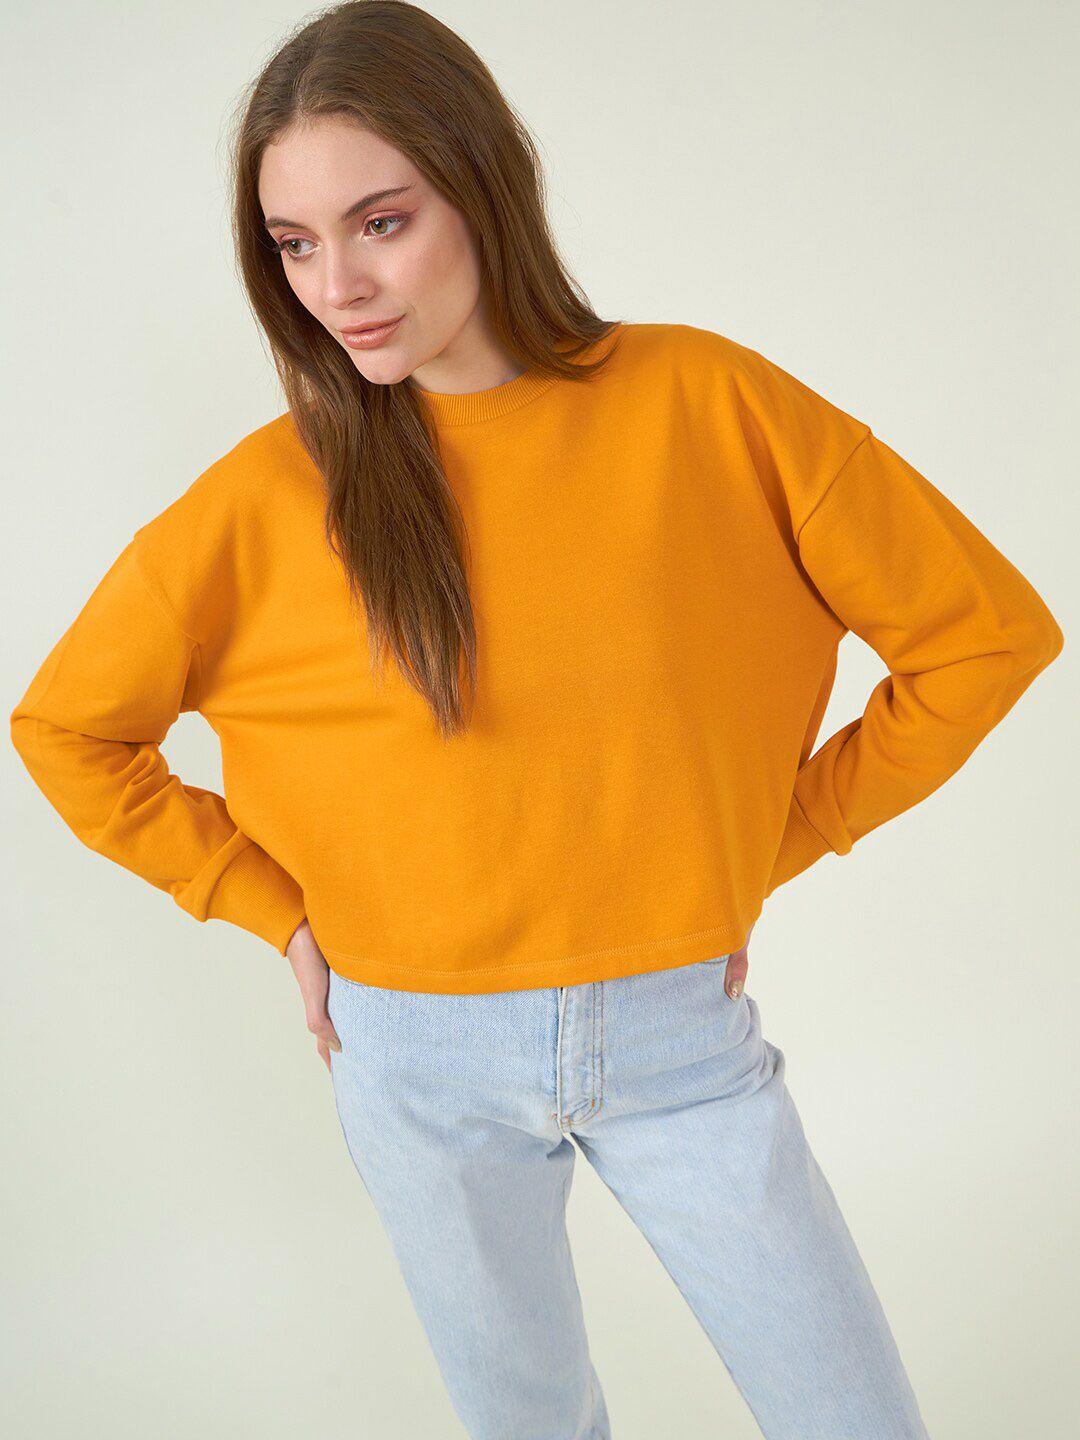 strong-and-brave-odour-free-cotton-crop-pullover-sweatshirt